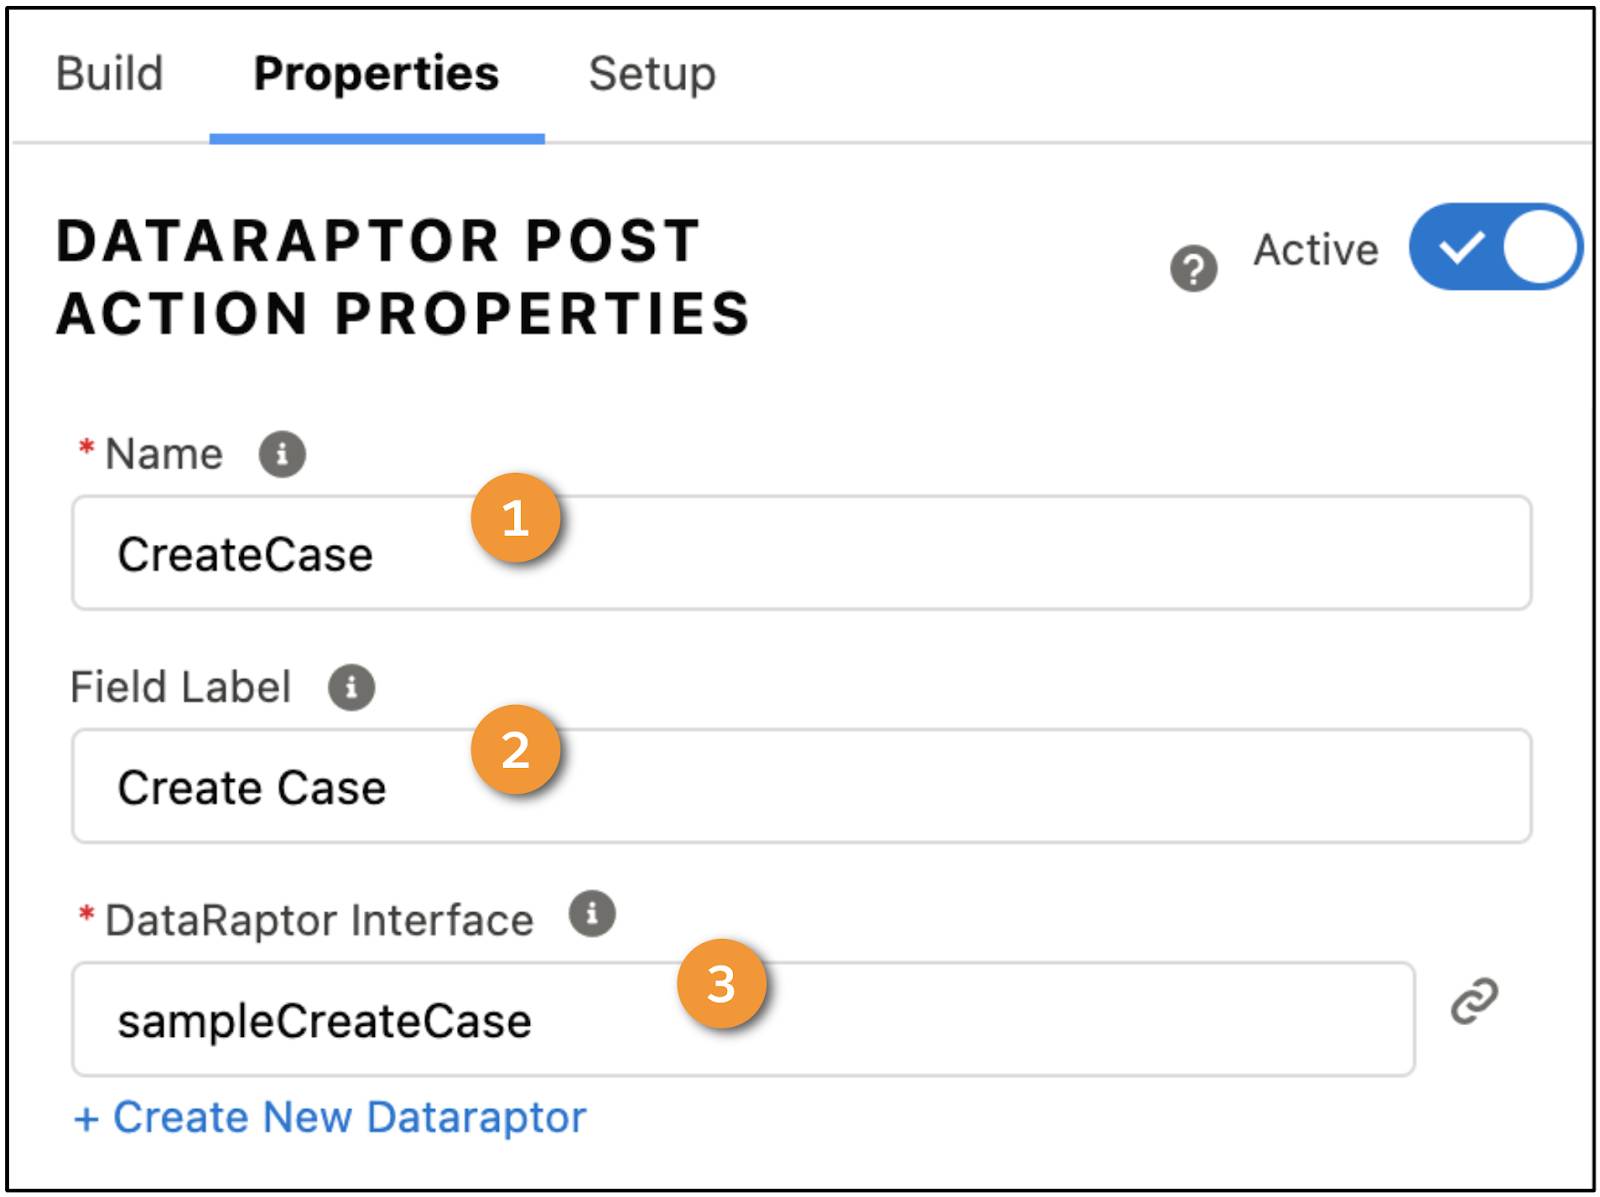 DataRaptor Post Action Properties include the name of the DataRaptor Load.